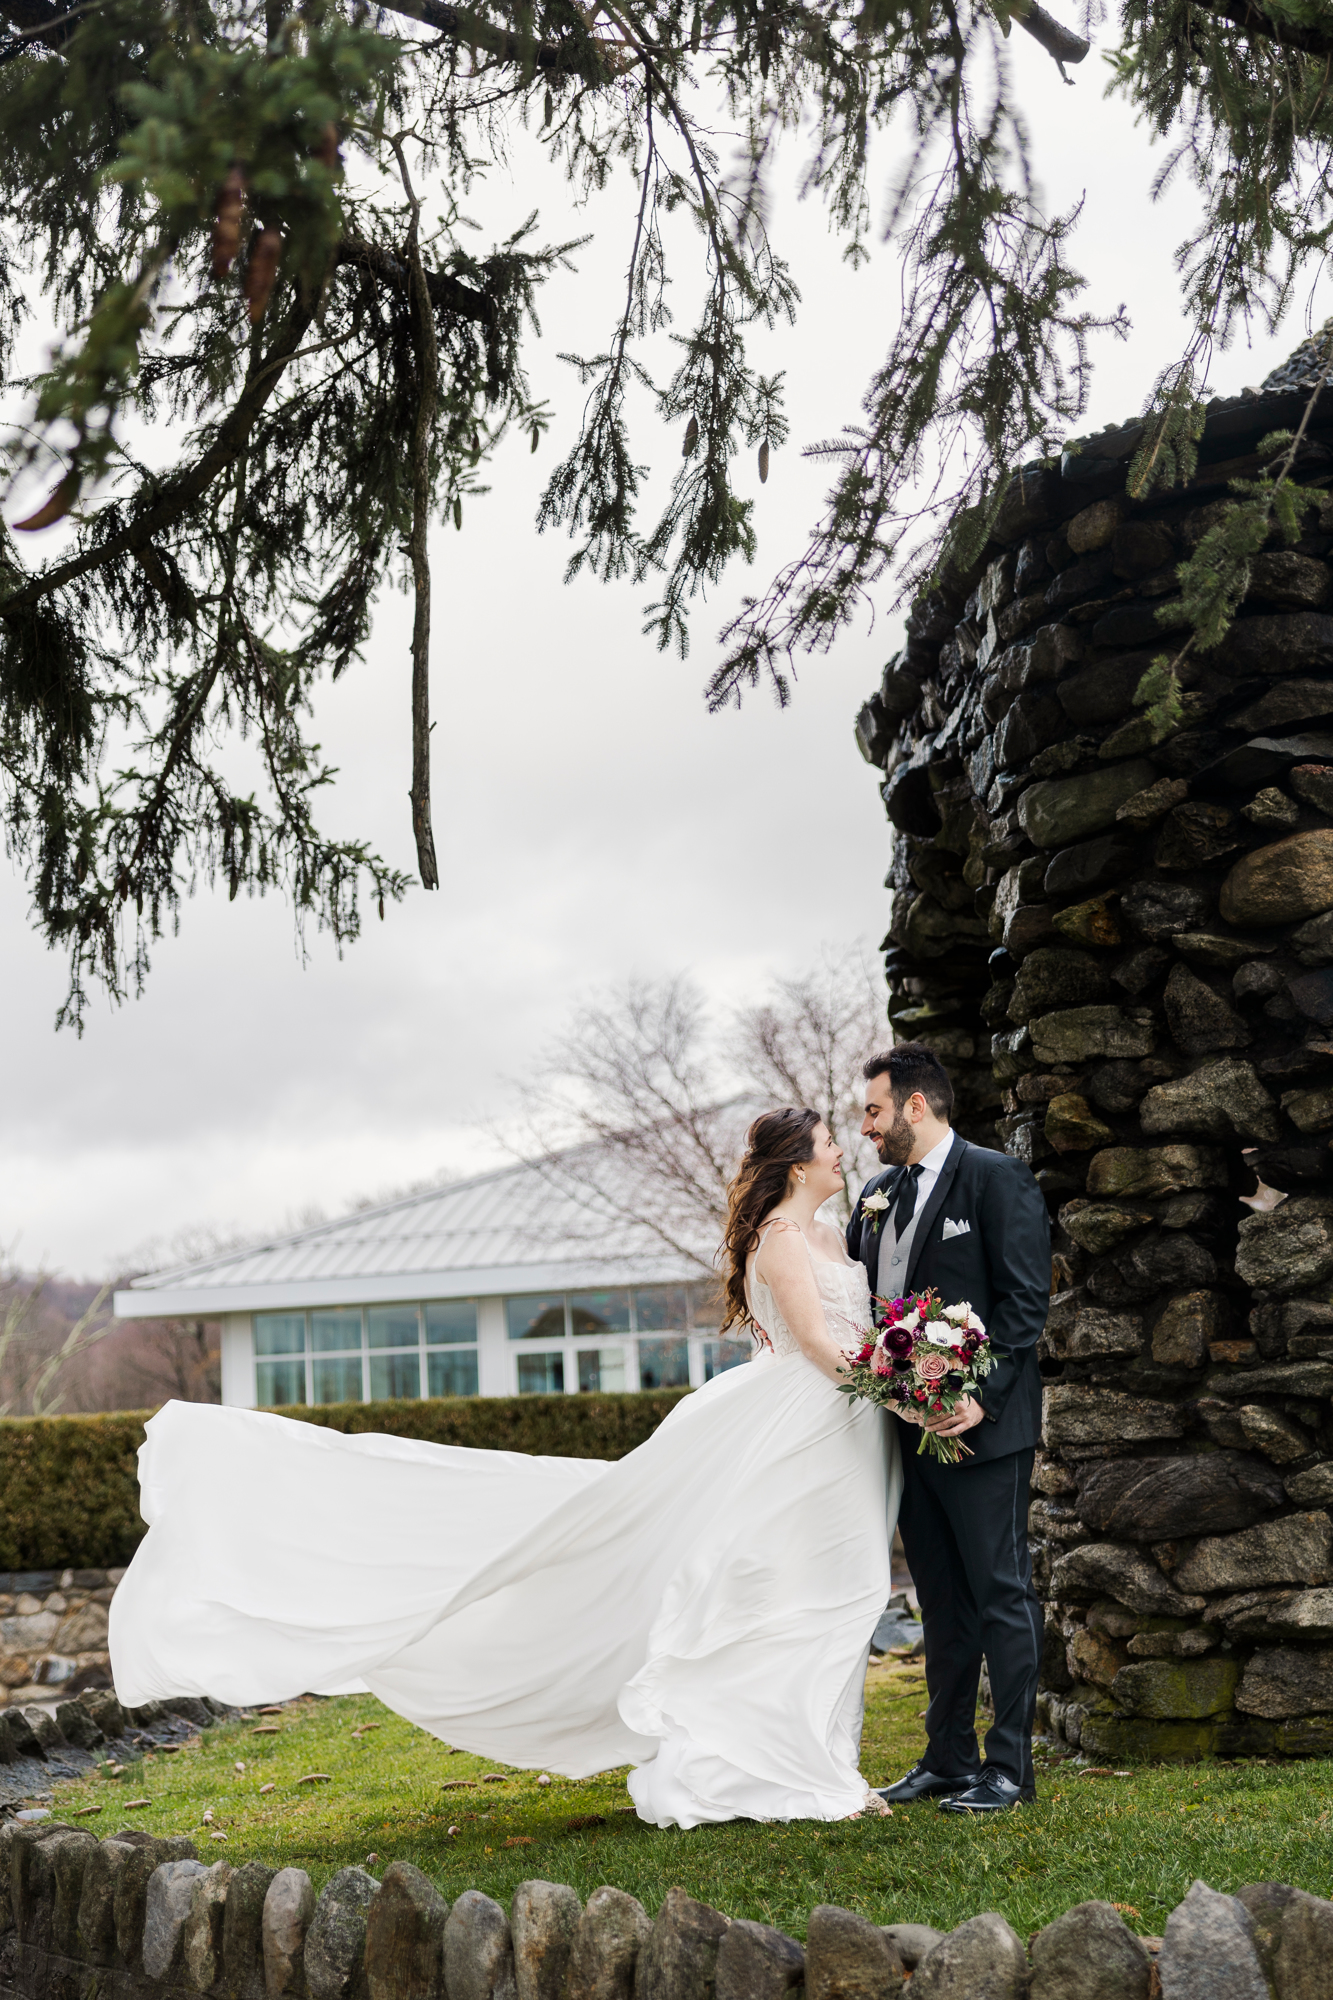 Cheerful wedding photography at The Garrison, NY